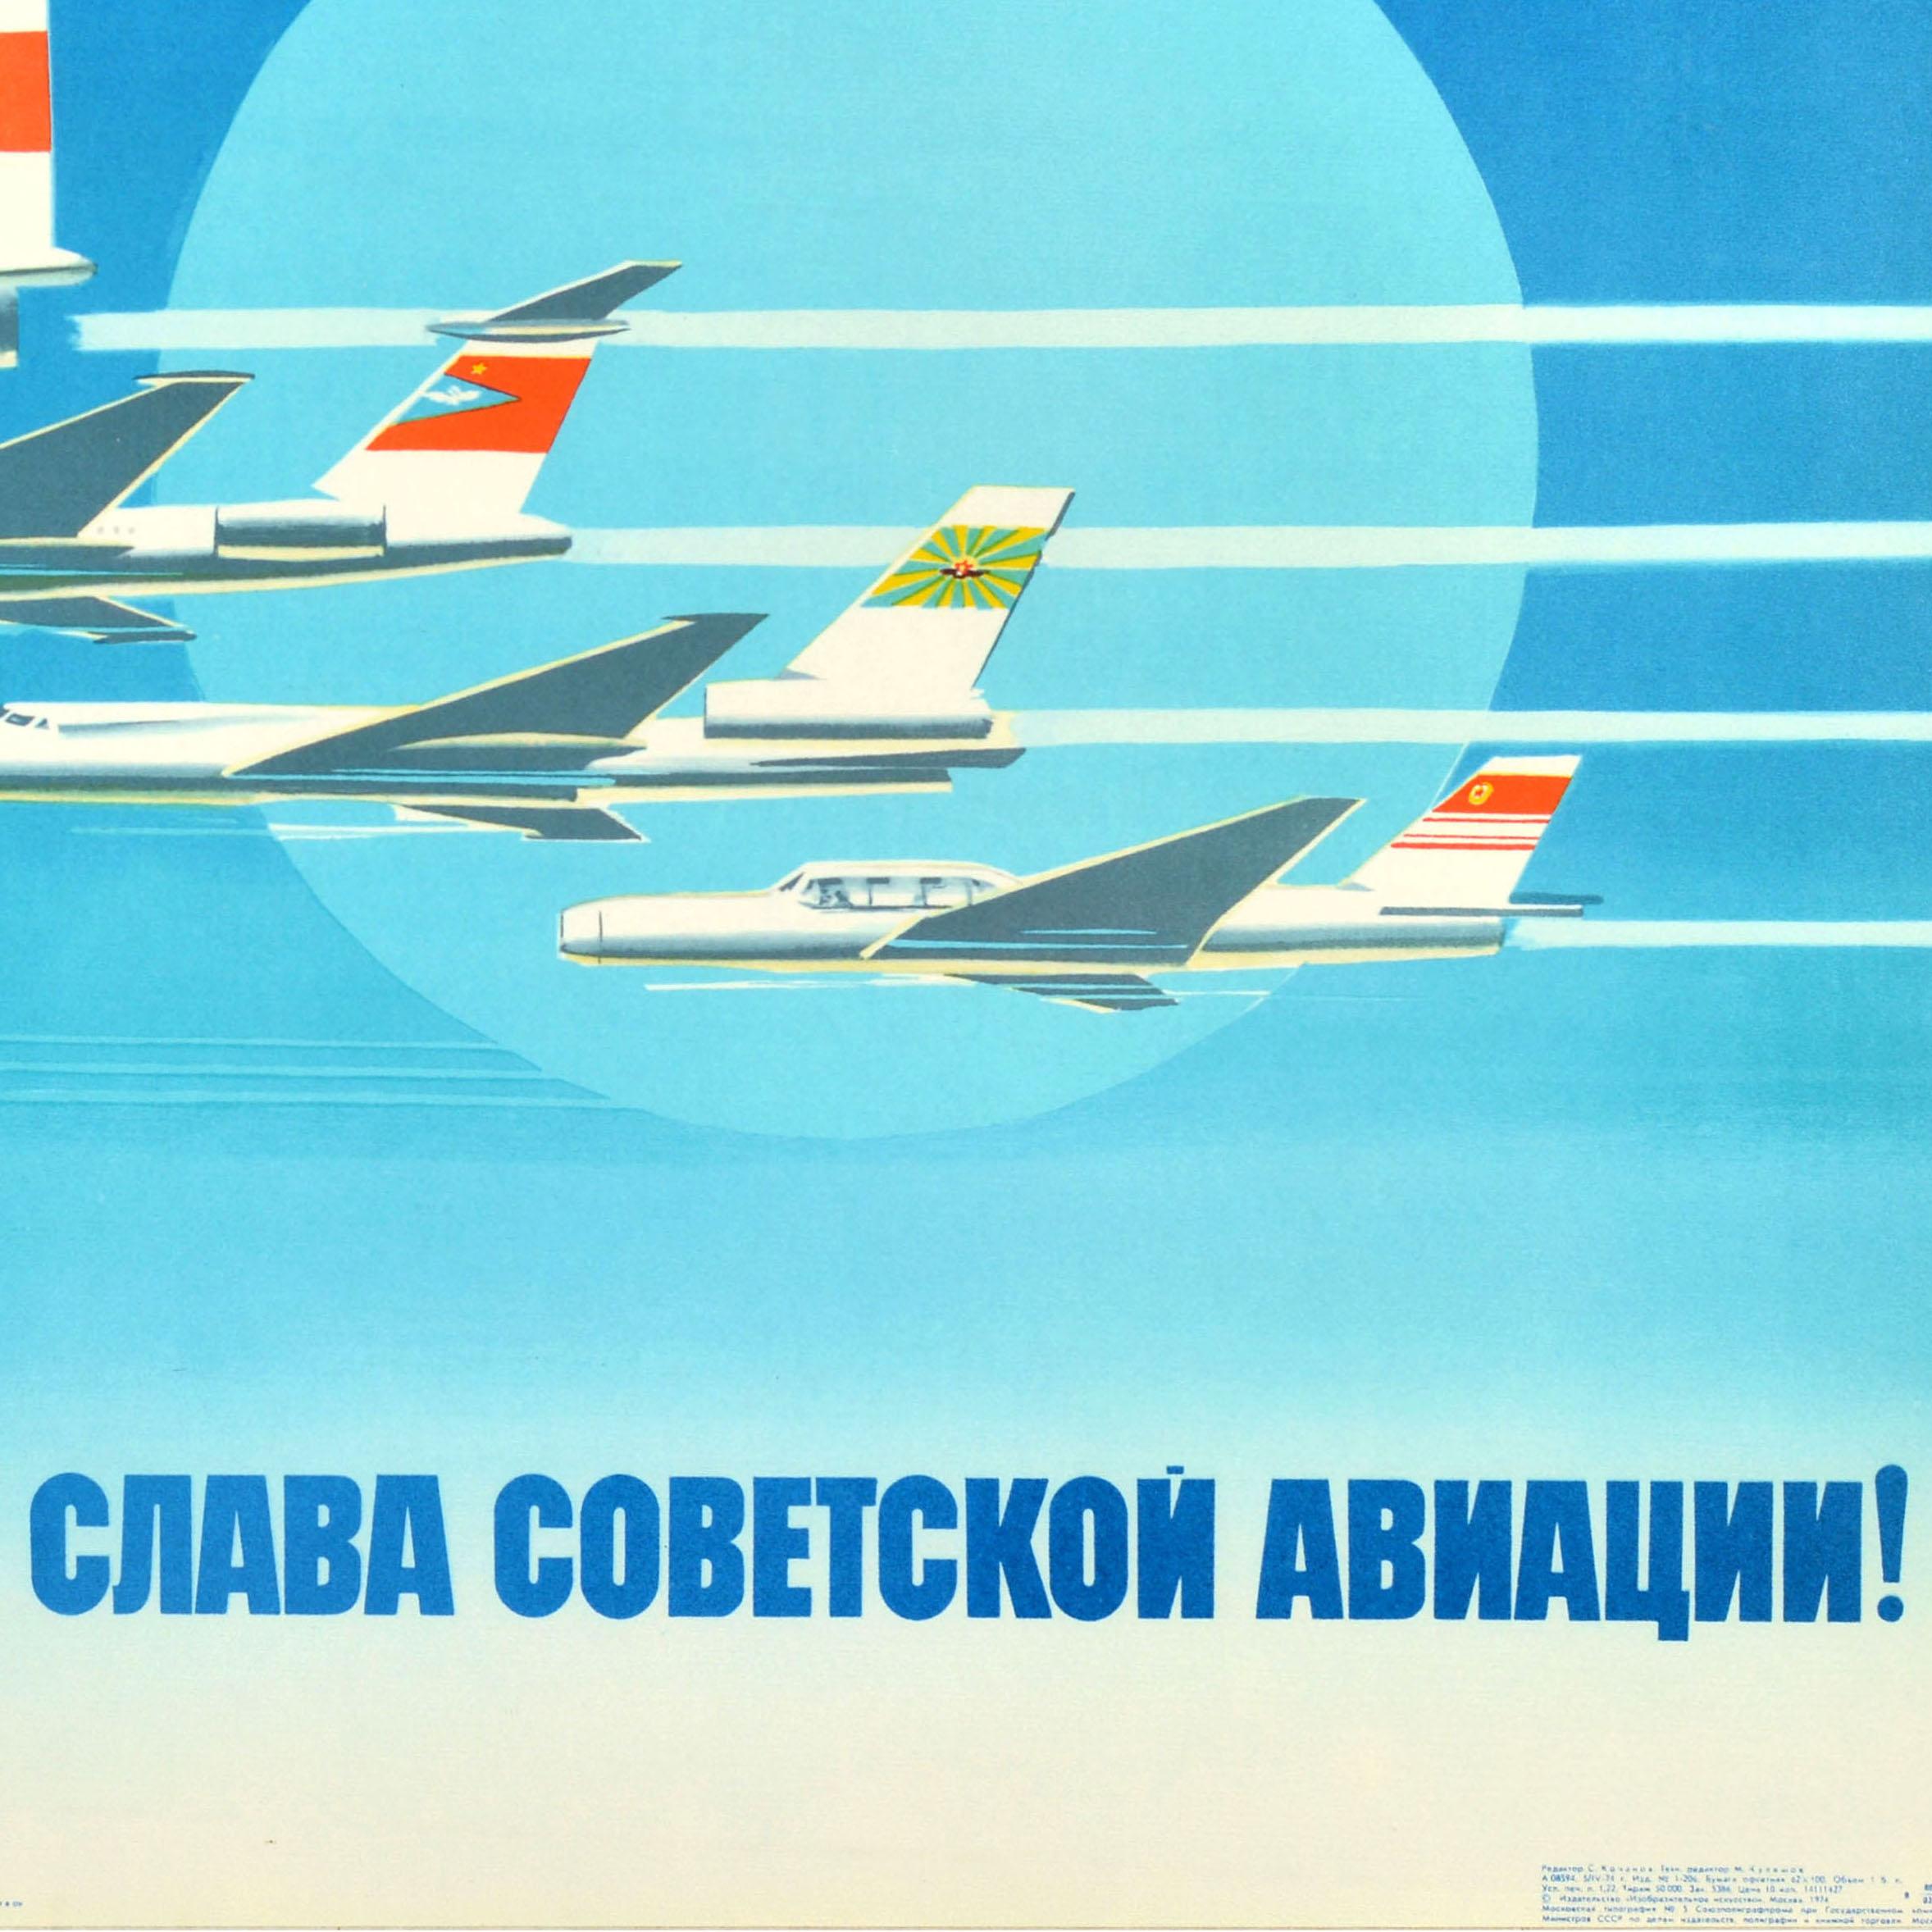 Original vintage Soviet propaganda poster - Слава советской авиации! Glory to Soviet Aviation - featuring a dynamic image of four planes, each aircraft with a flag on its tail fin including the hammer and sickle of the USSR and the Soviet Air Force